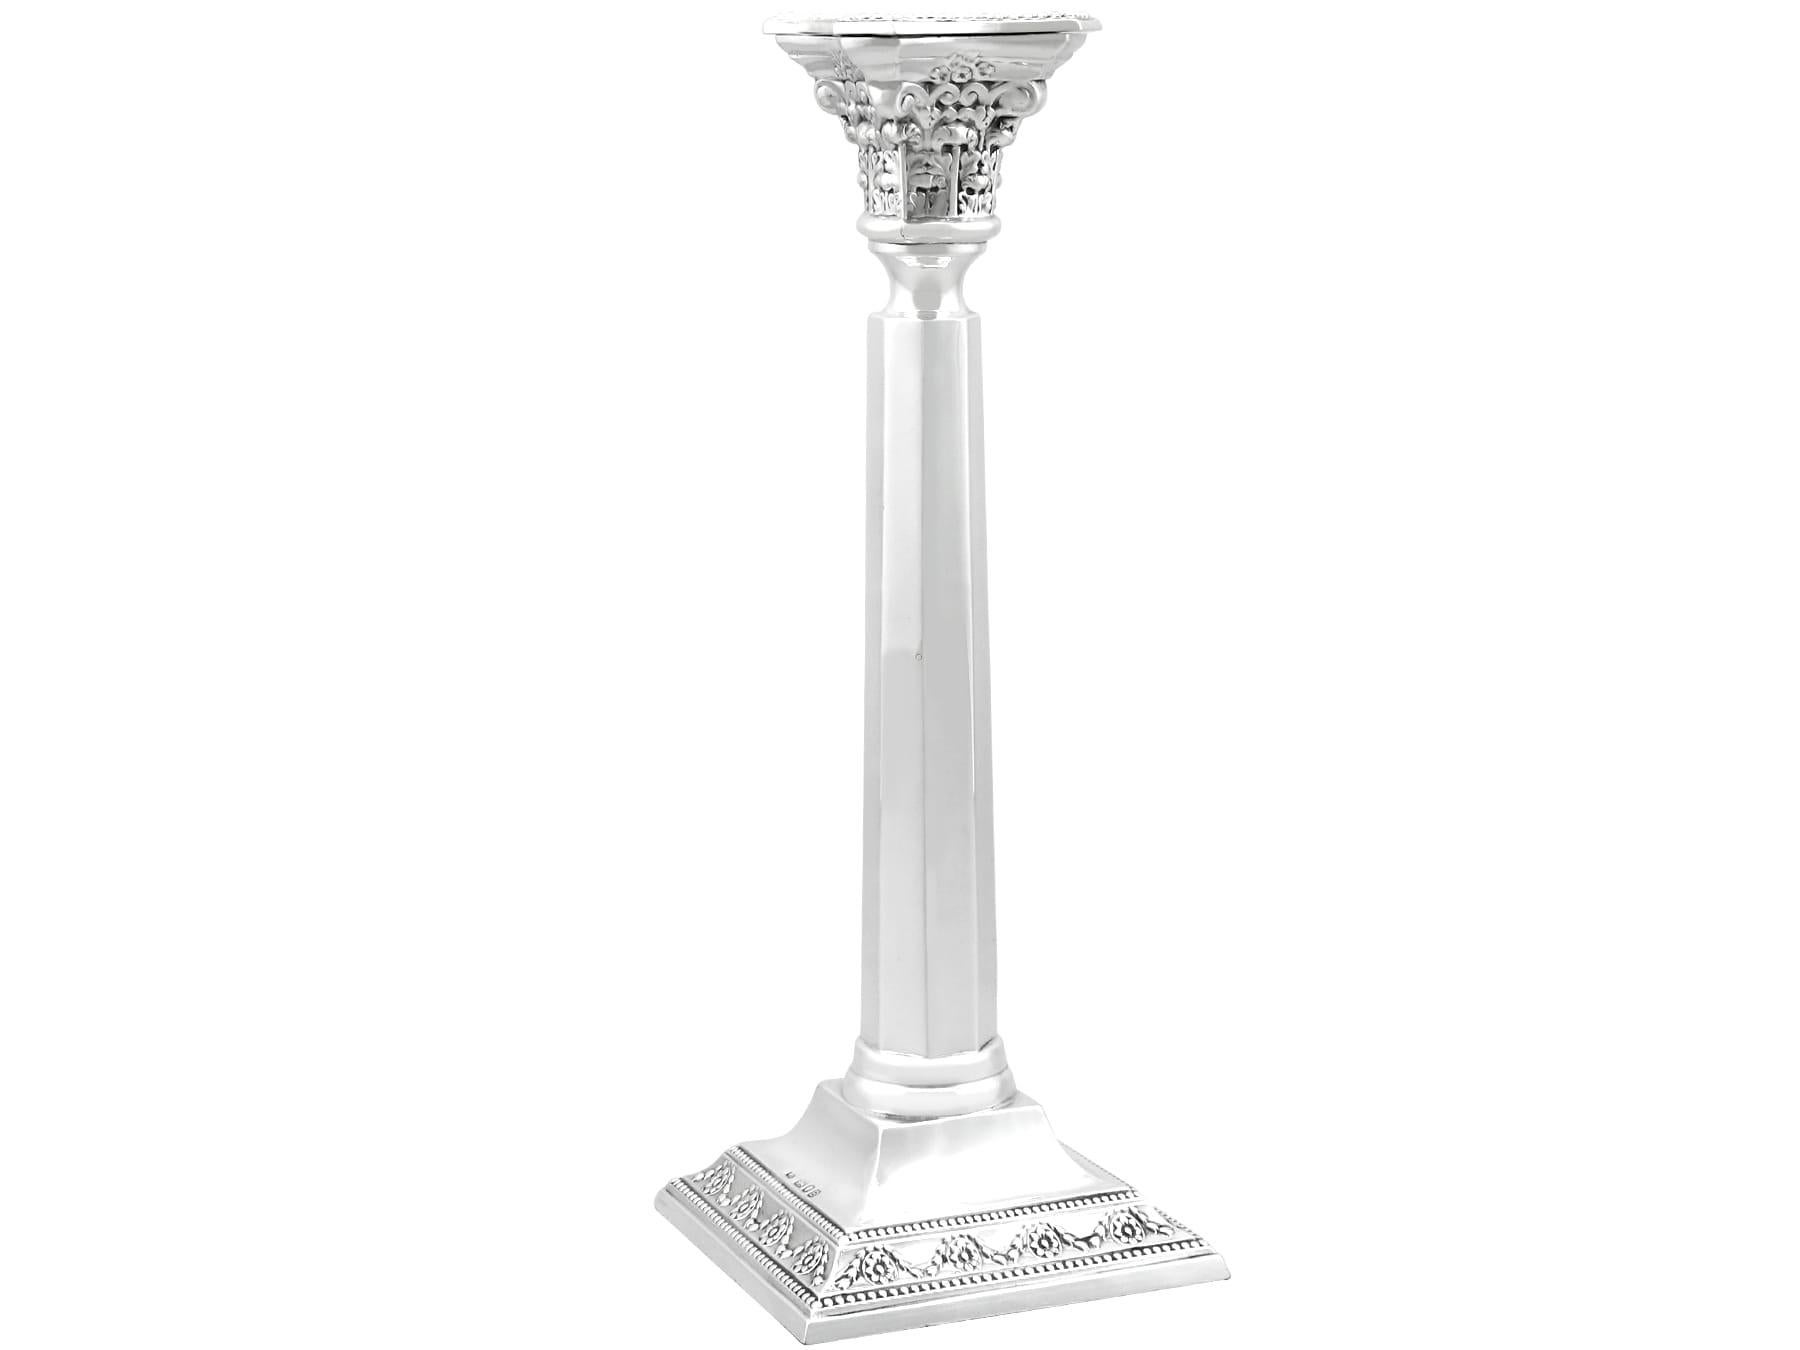 A fine and impressive, pair of antique George VI English sterling silver candlesticks; part of our ornamental silverware collection.

These impressive antique 1930s English sterling silver candlesticks have a plain subtly tapering columnar